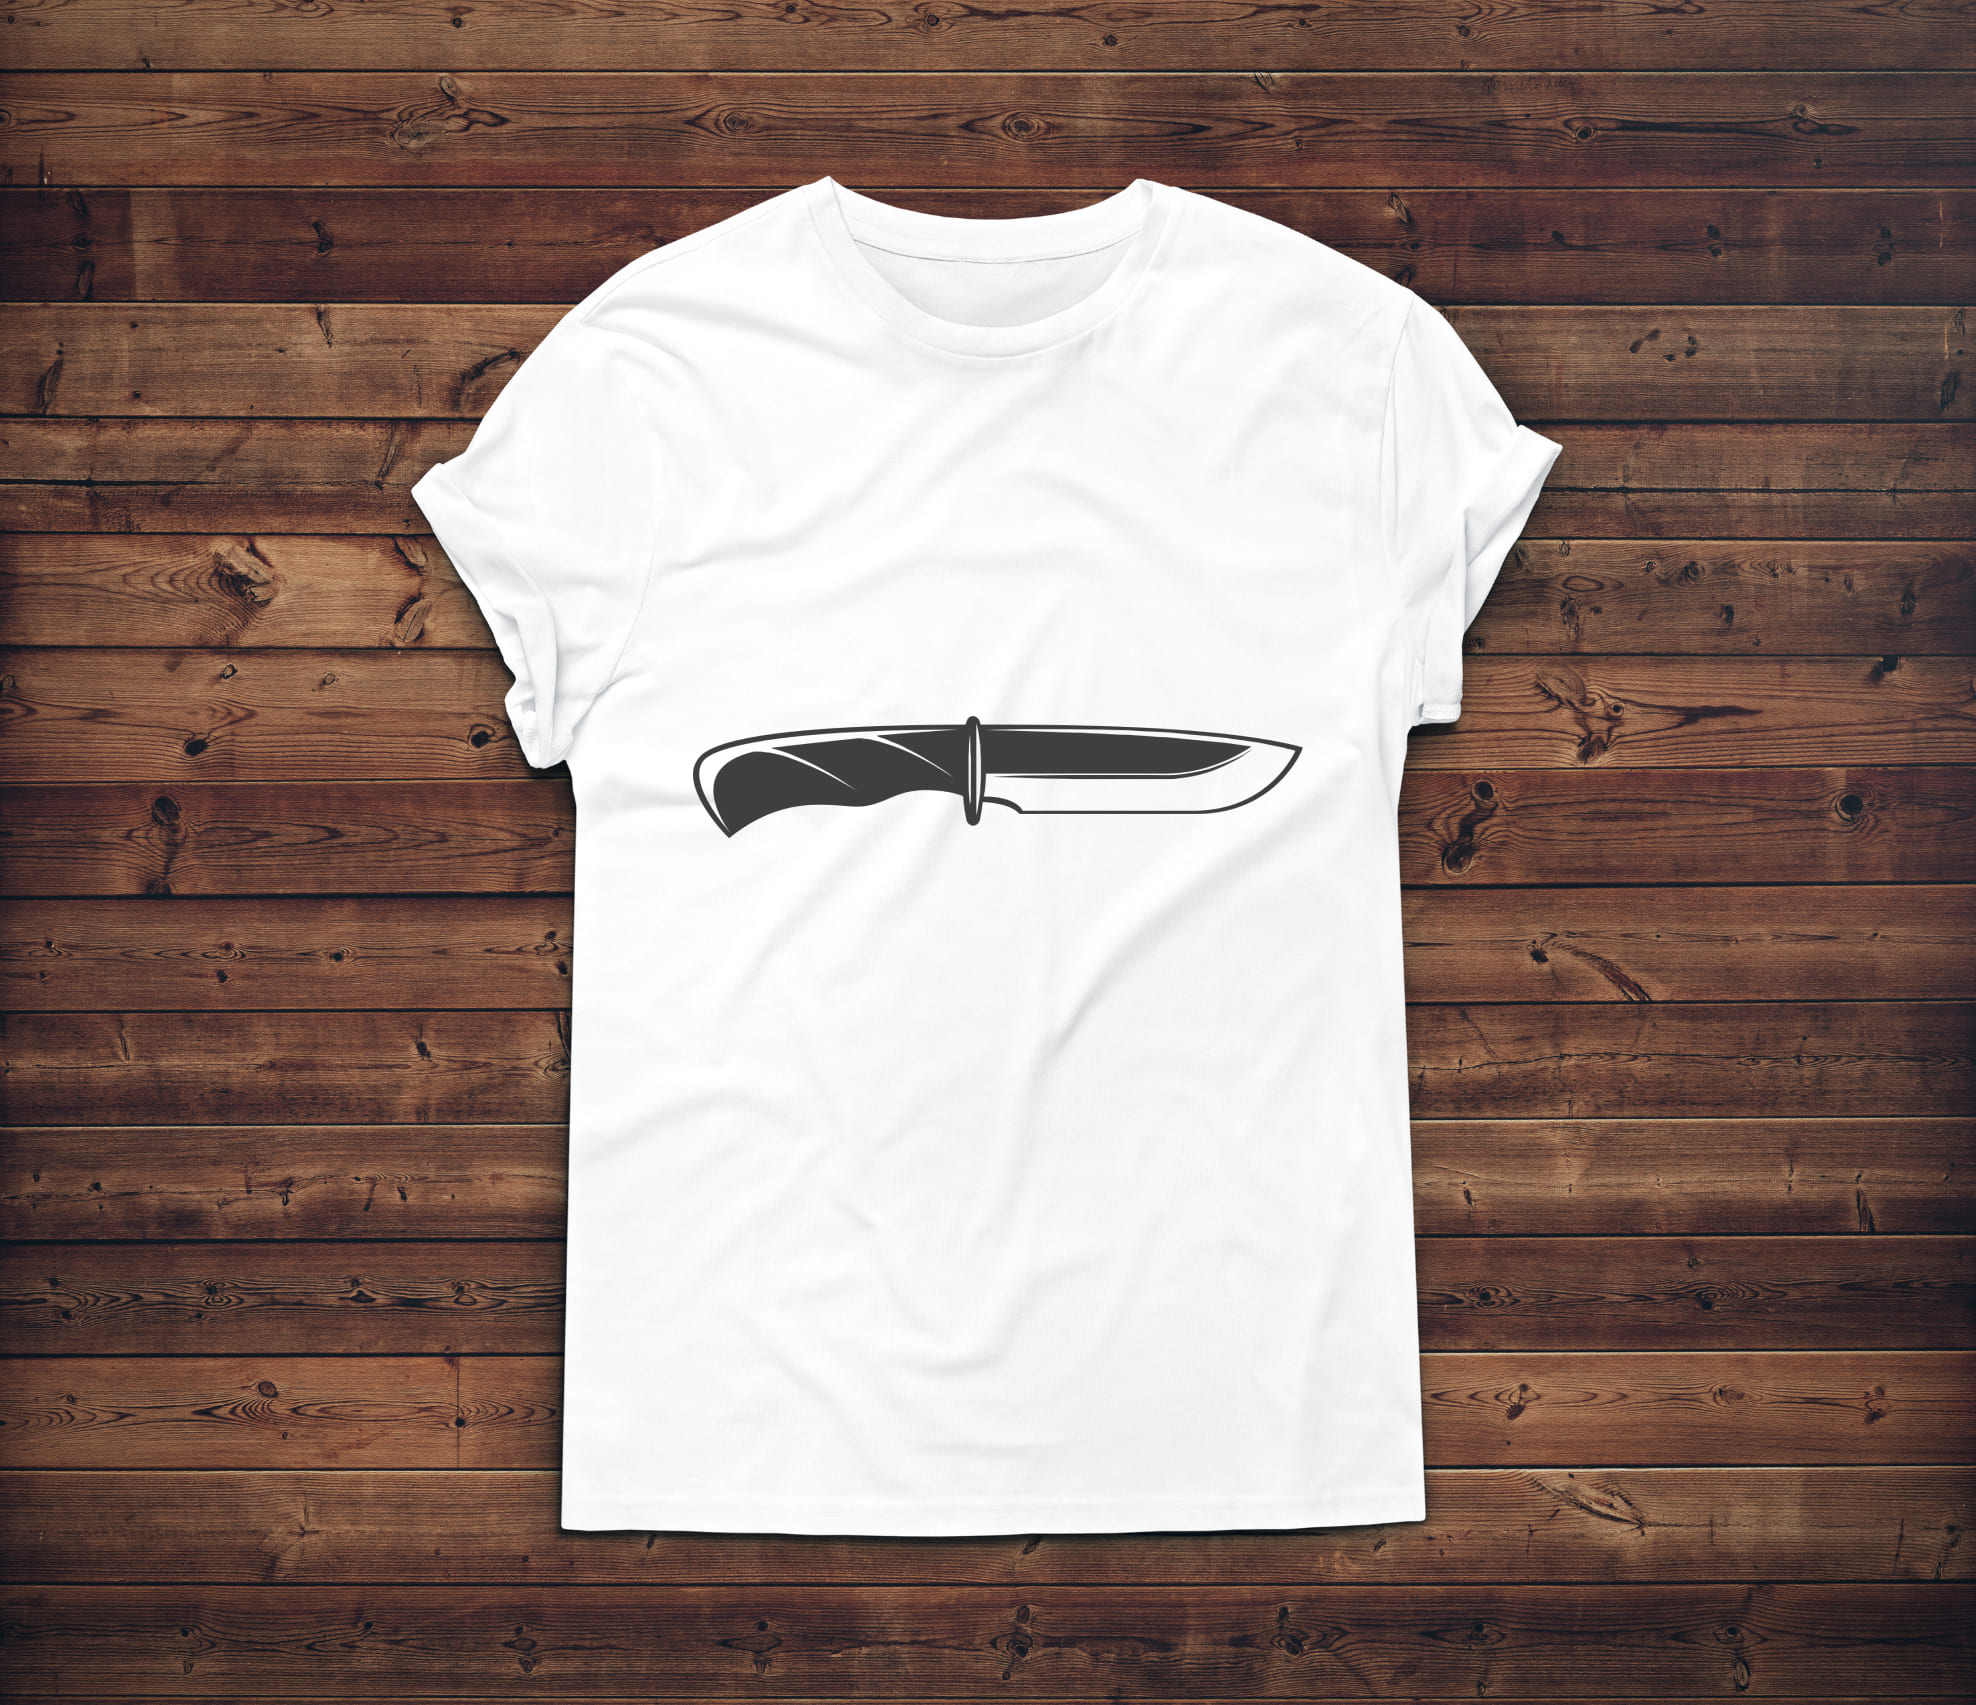 Image of a white t-shirt with an irresistible knife silhouette print.